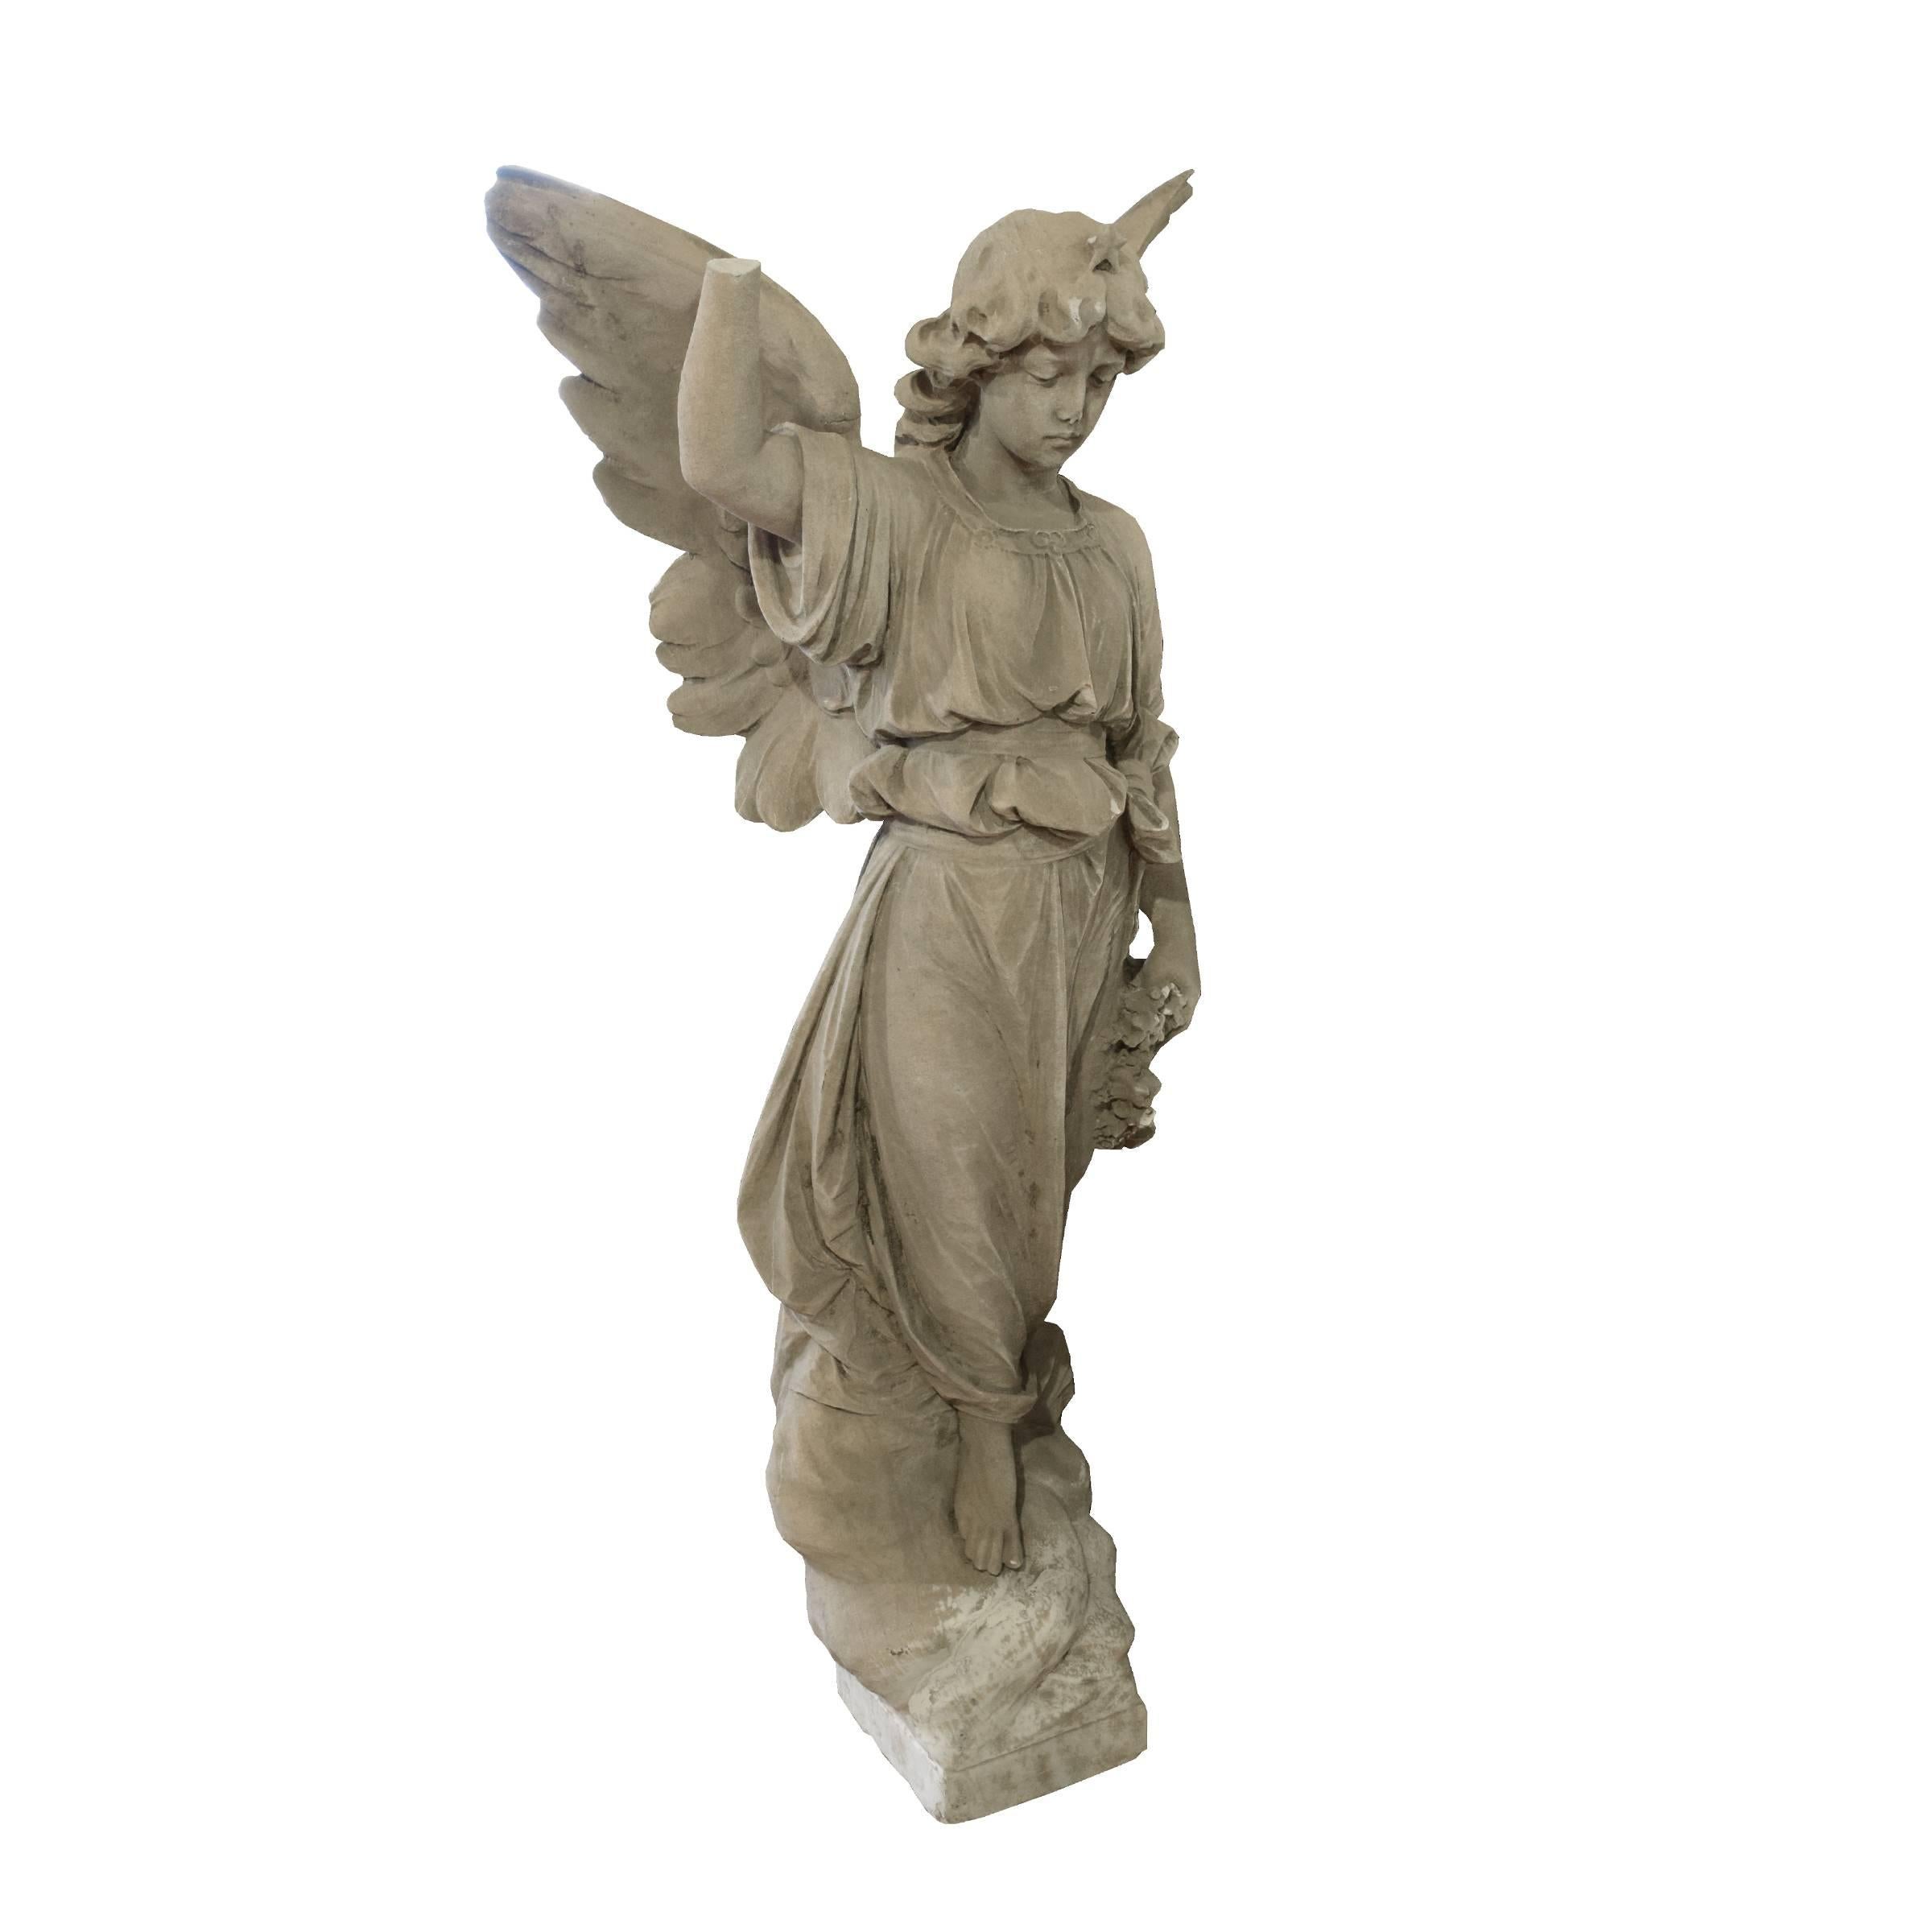 A gorgeous Italian carved marble angel with wings and holding a floral wreath, circa 1900.